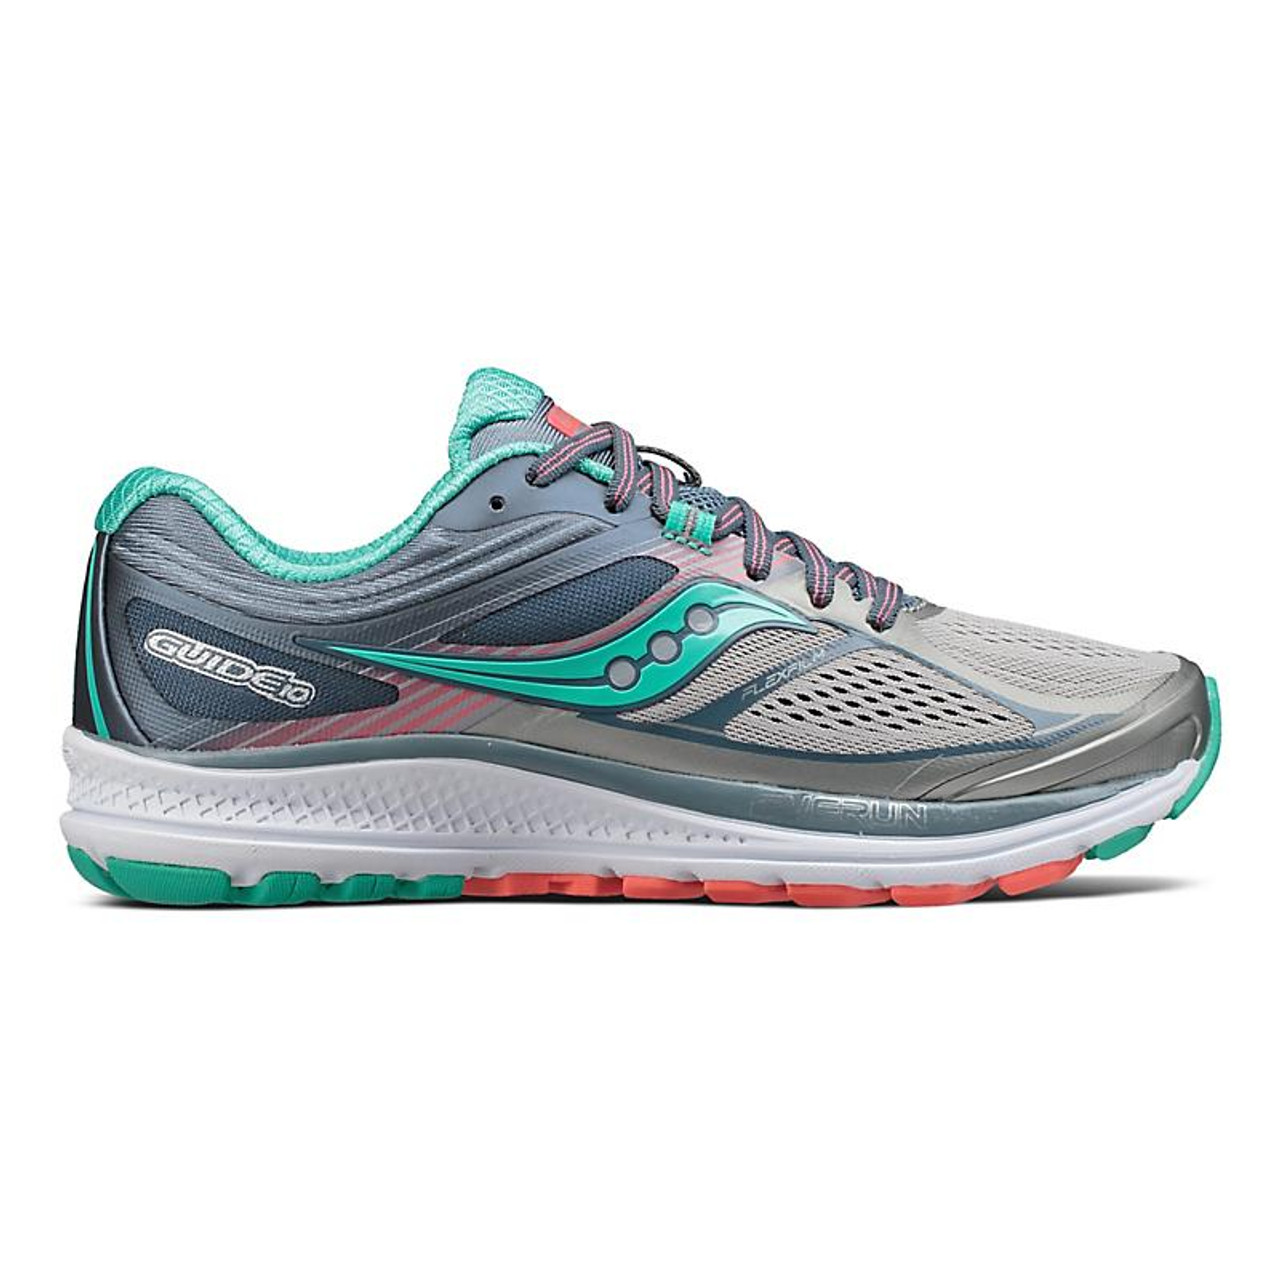 saucony guide running warehouse